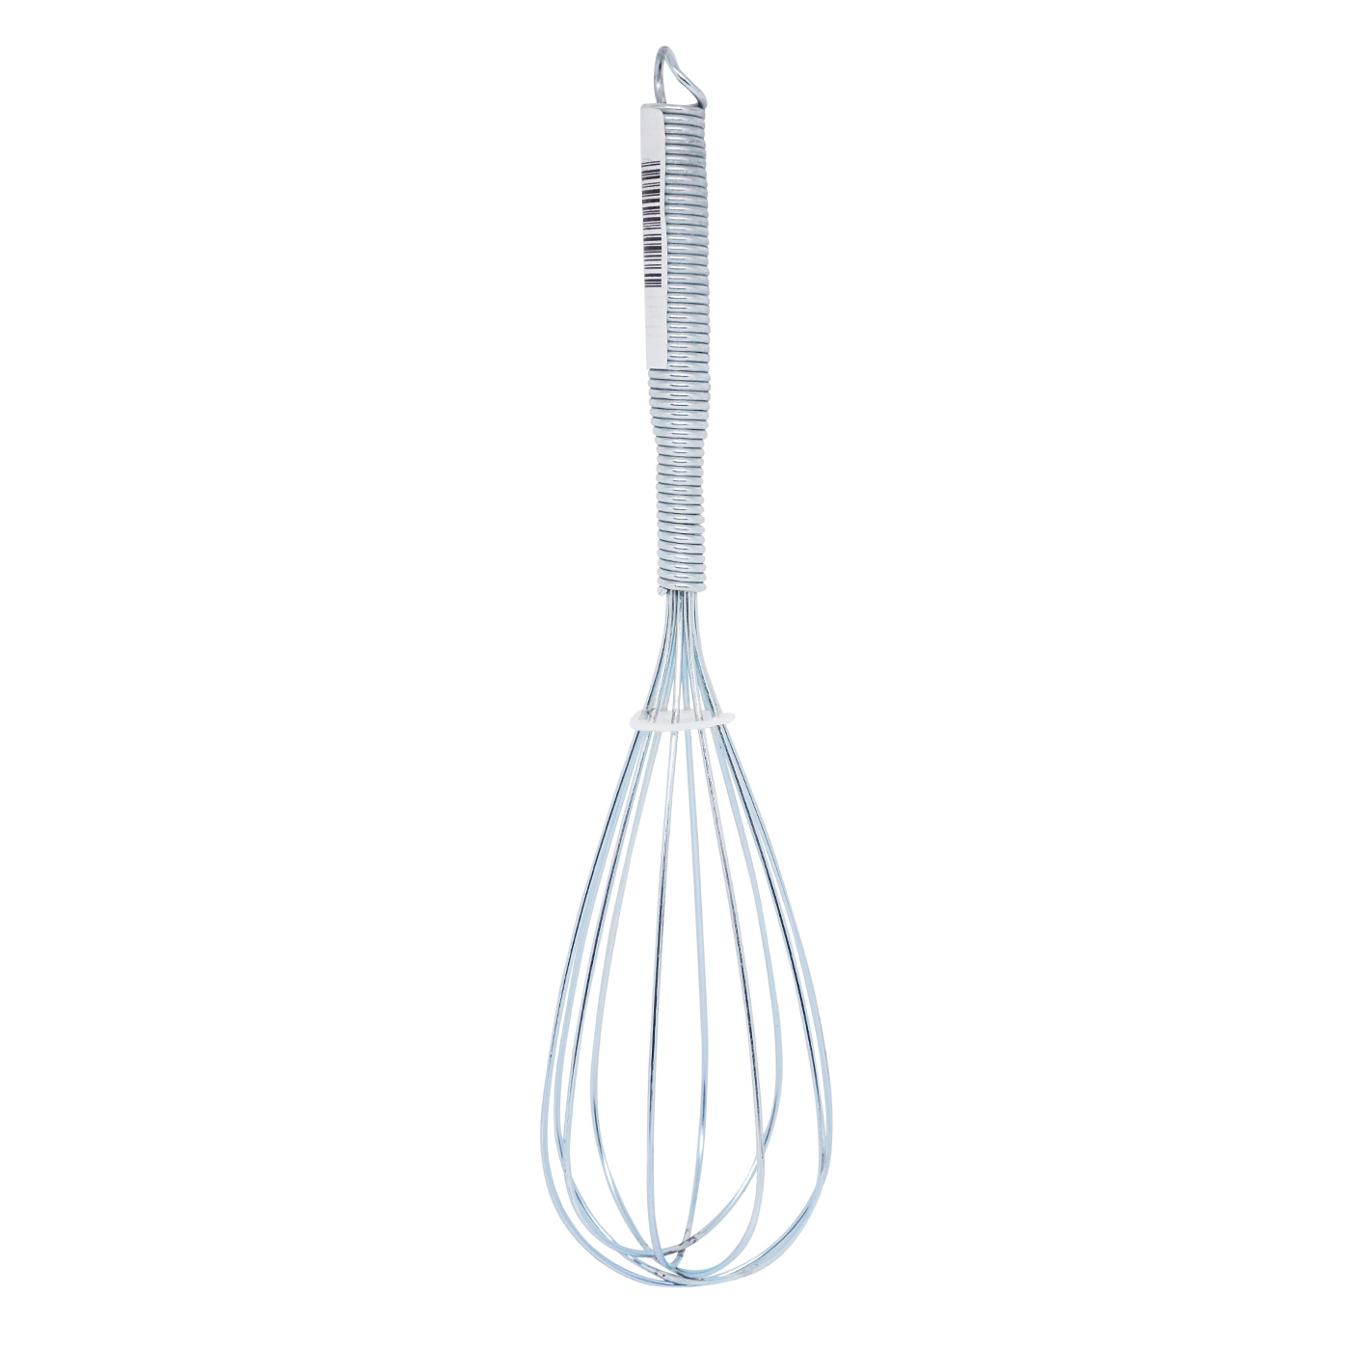 Whisk for whipping with a metal handle